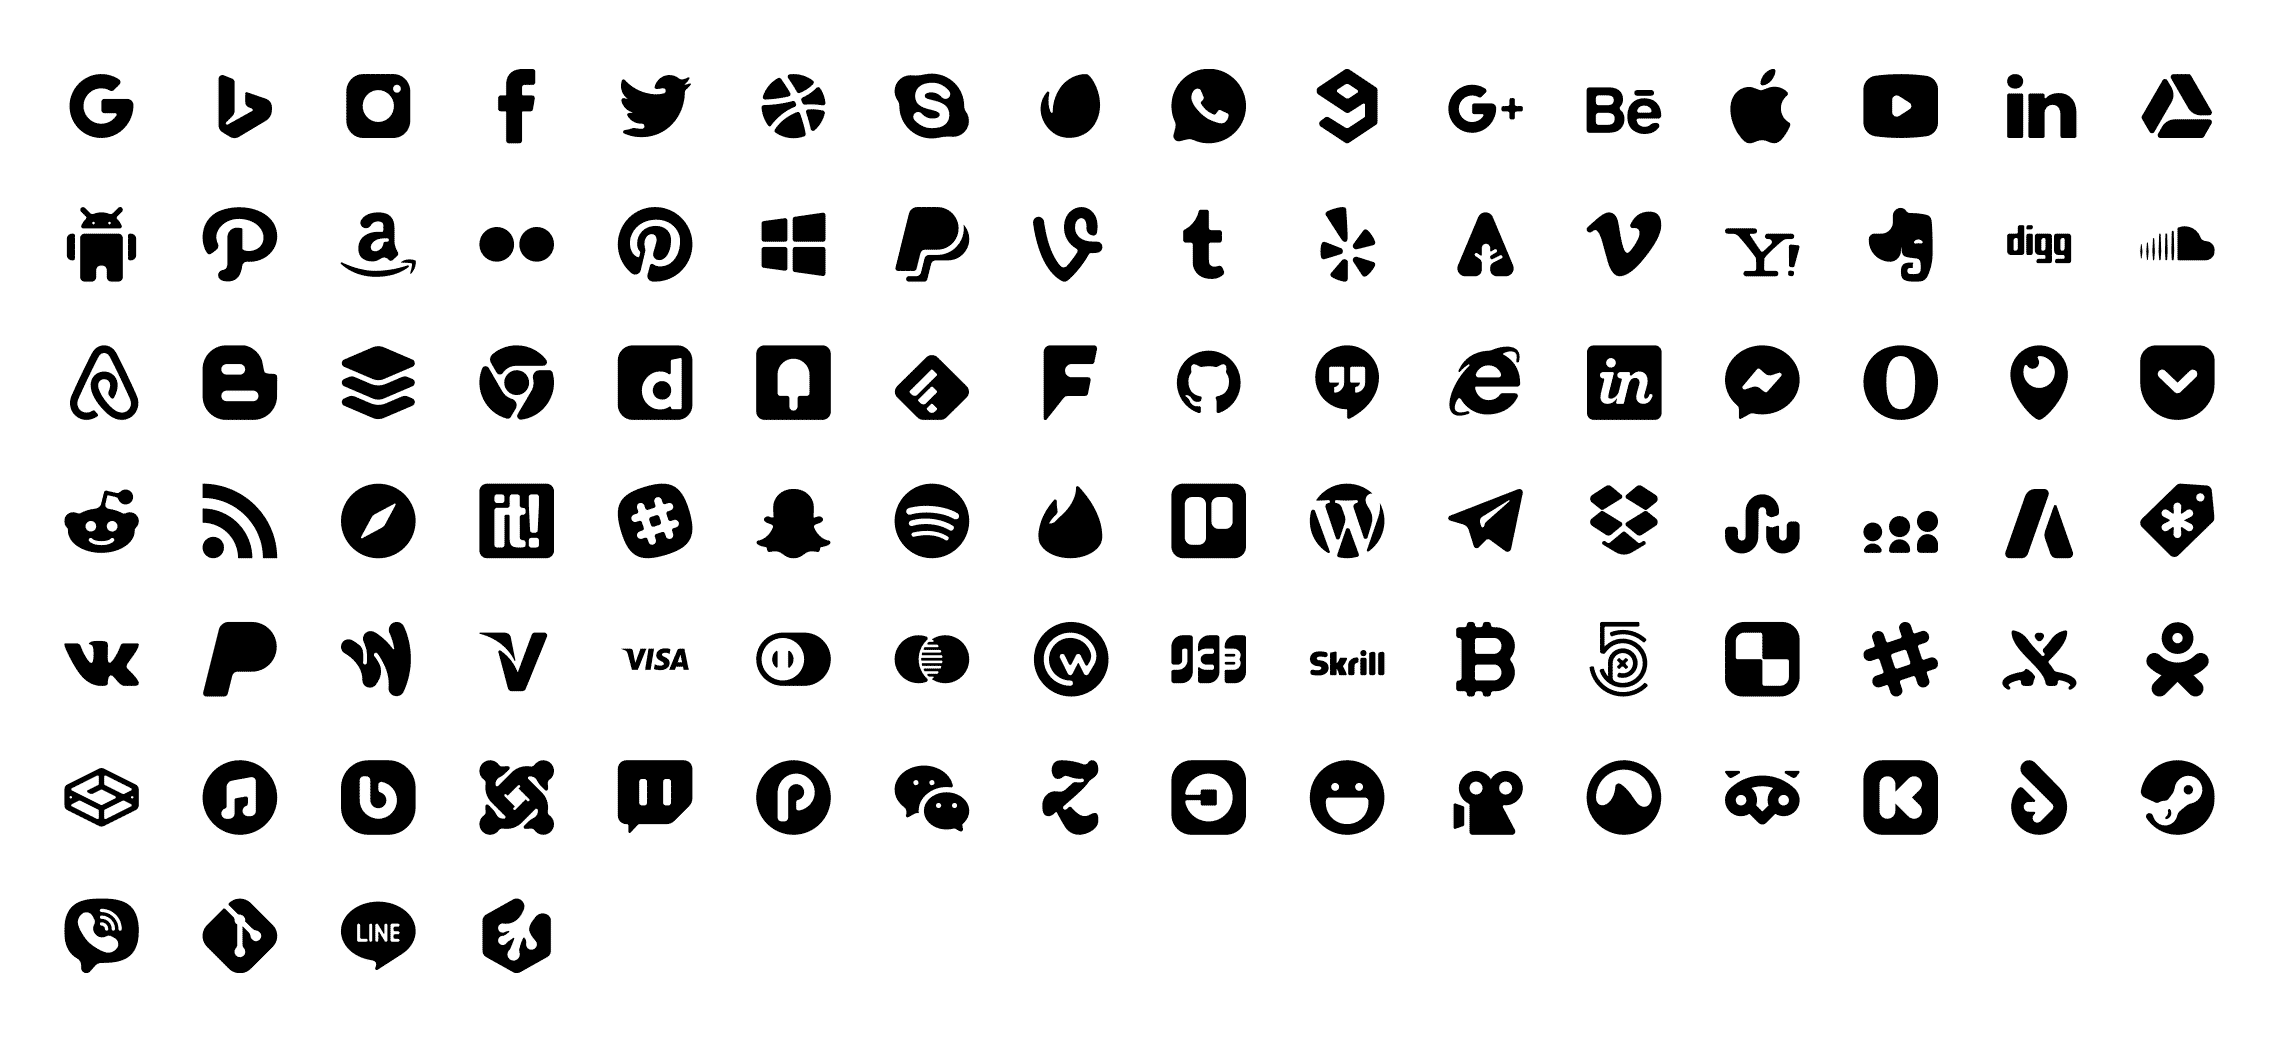 social-media-and-payment-icons-preview